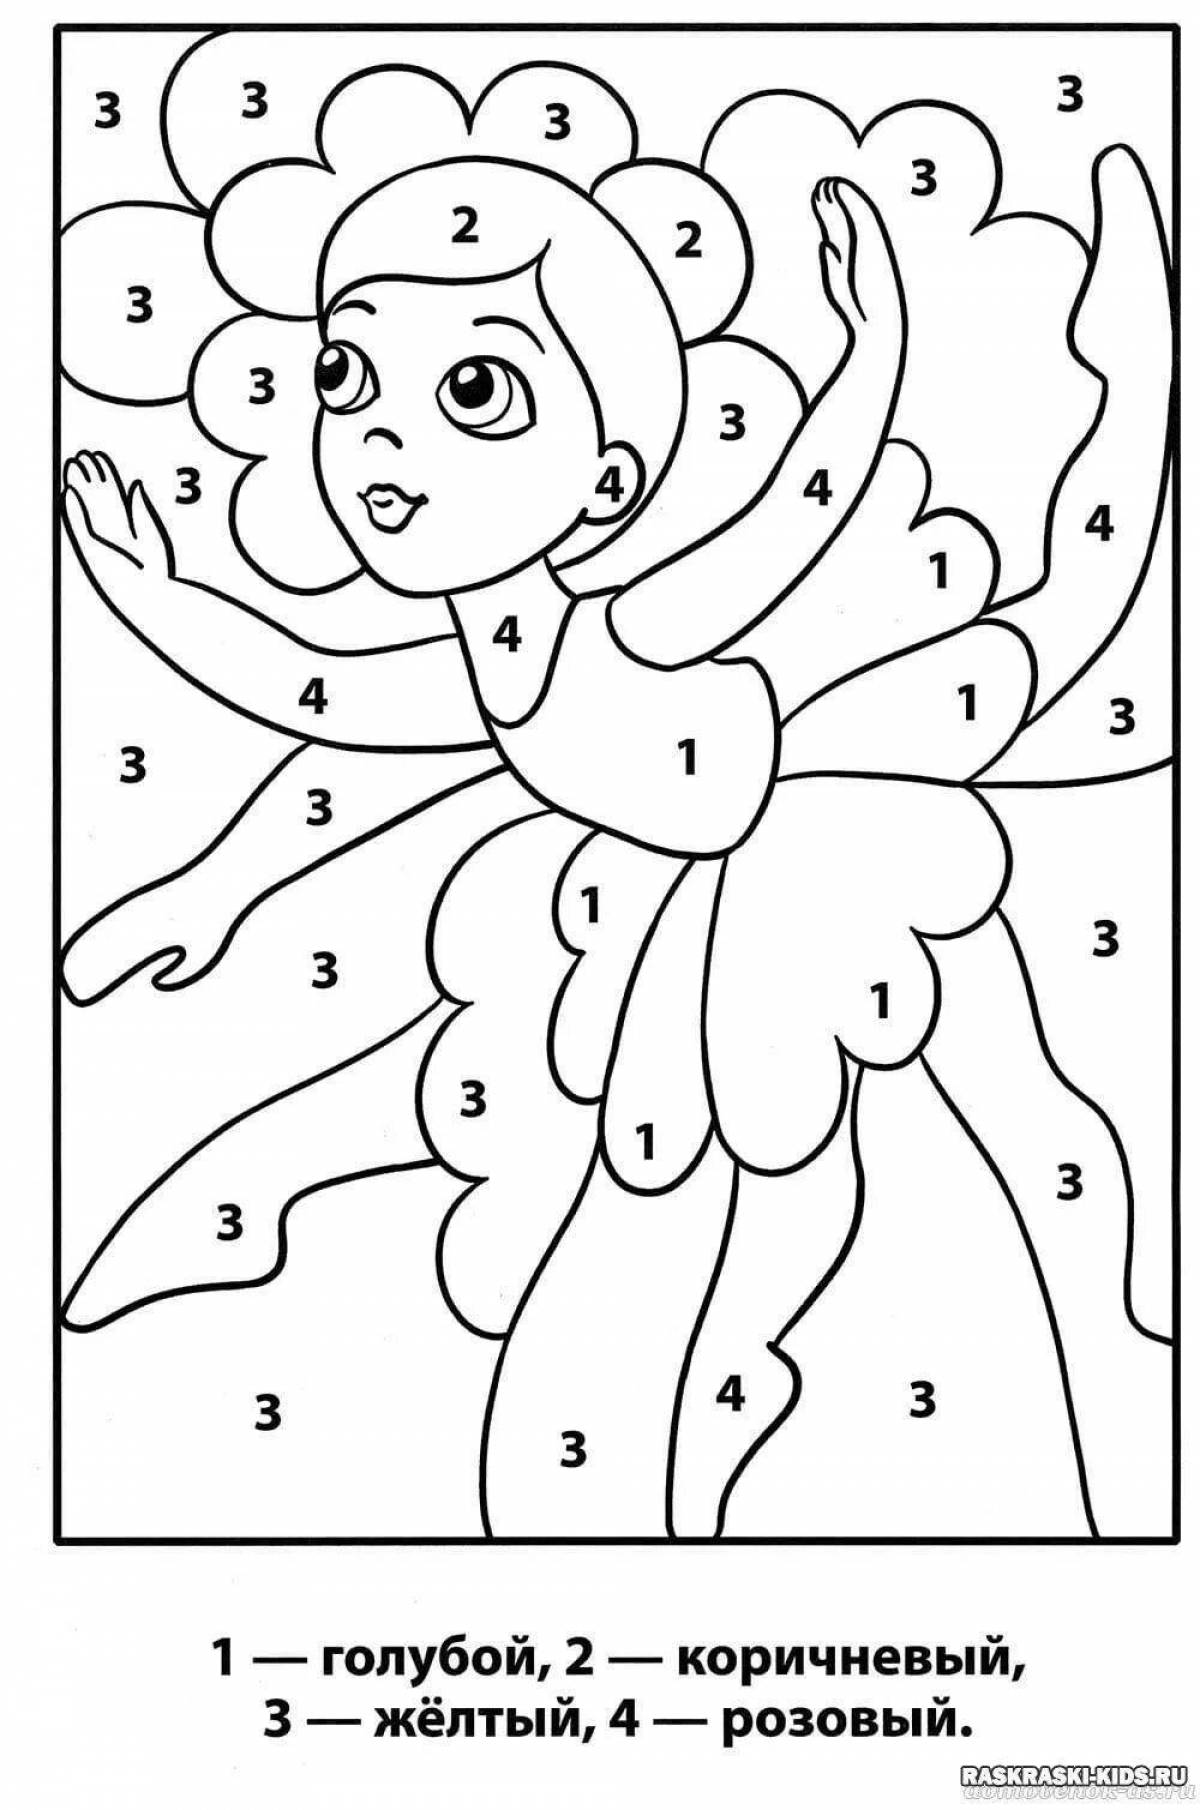 Coloring book for girls 4-5 years old